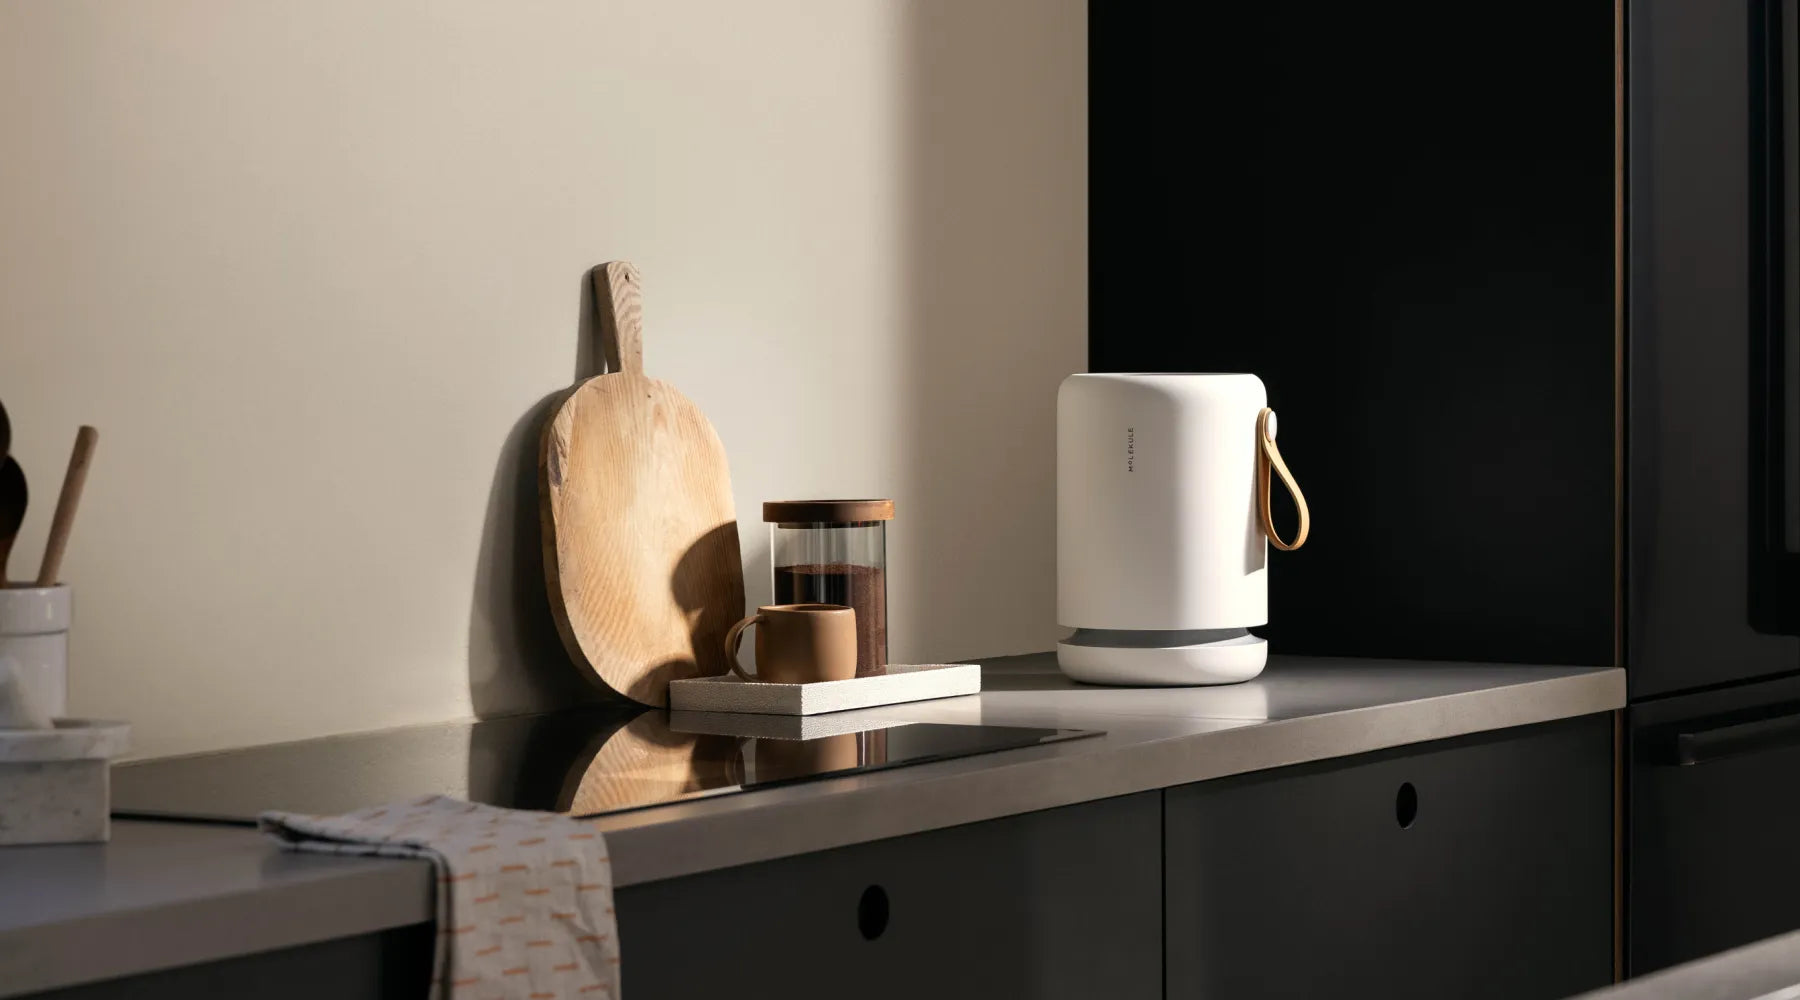 Molekule Air Mini+ sits on a kitchen counter with various small appliances and kitchen gadgets.